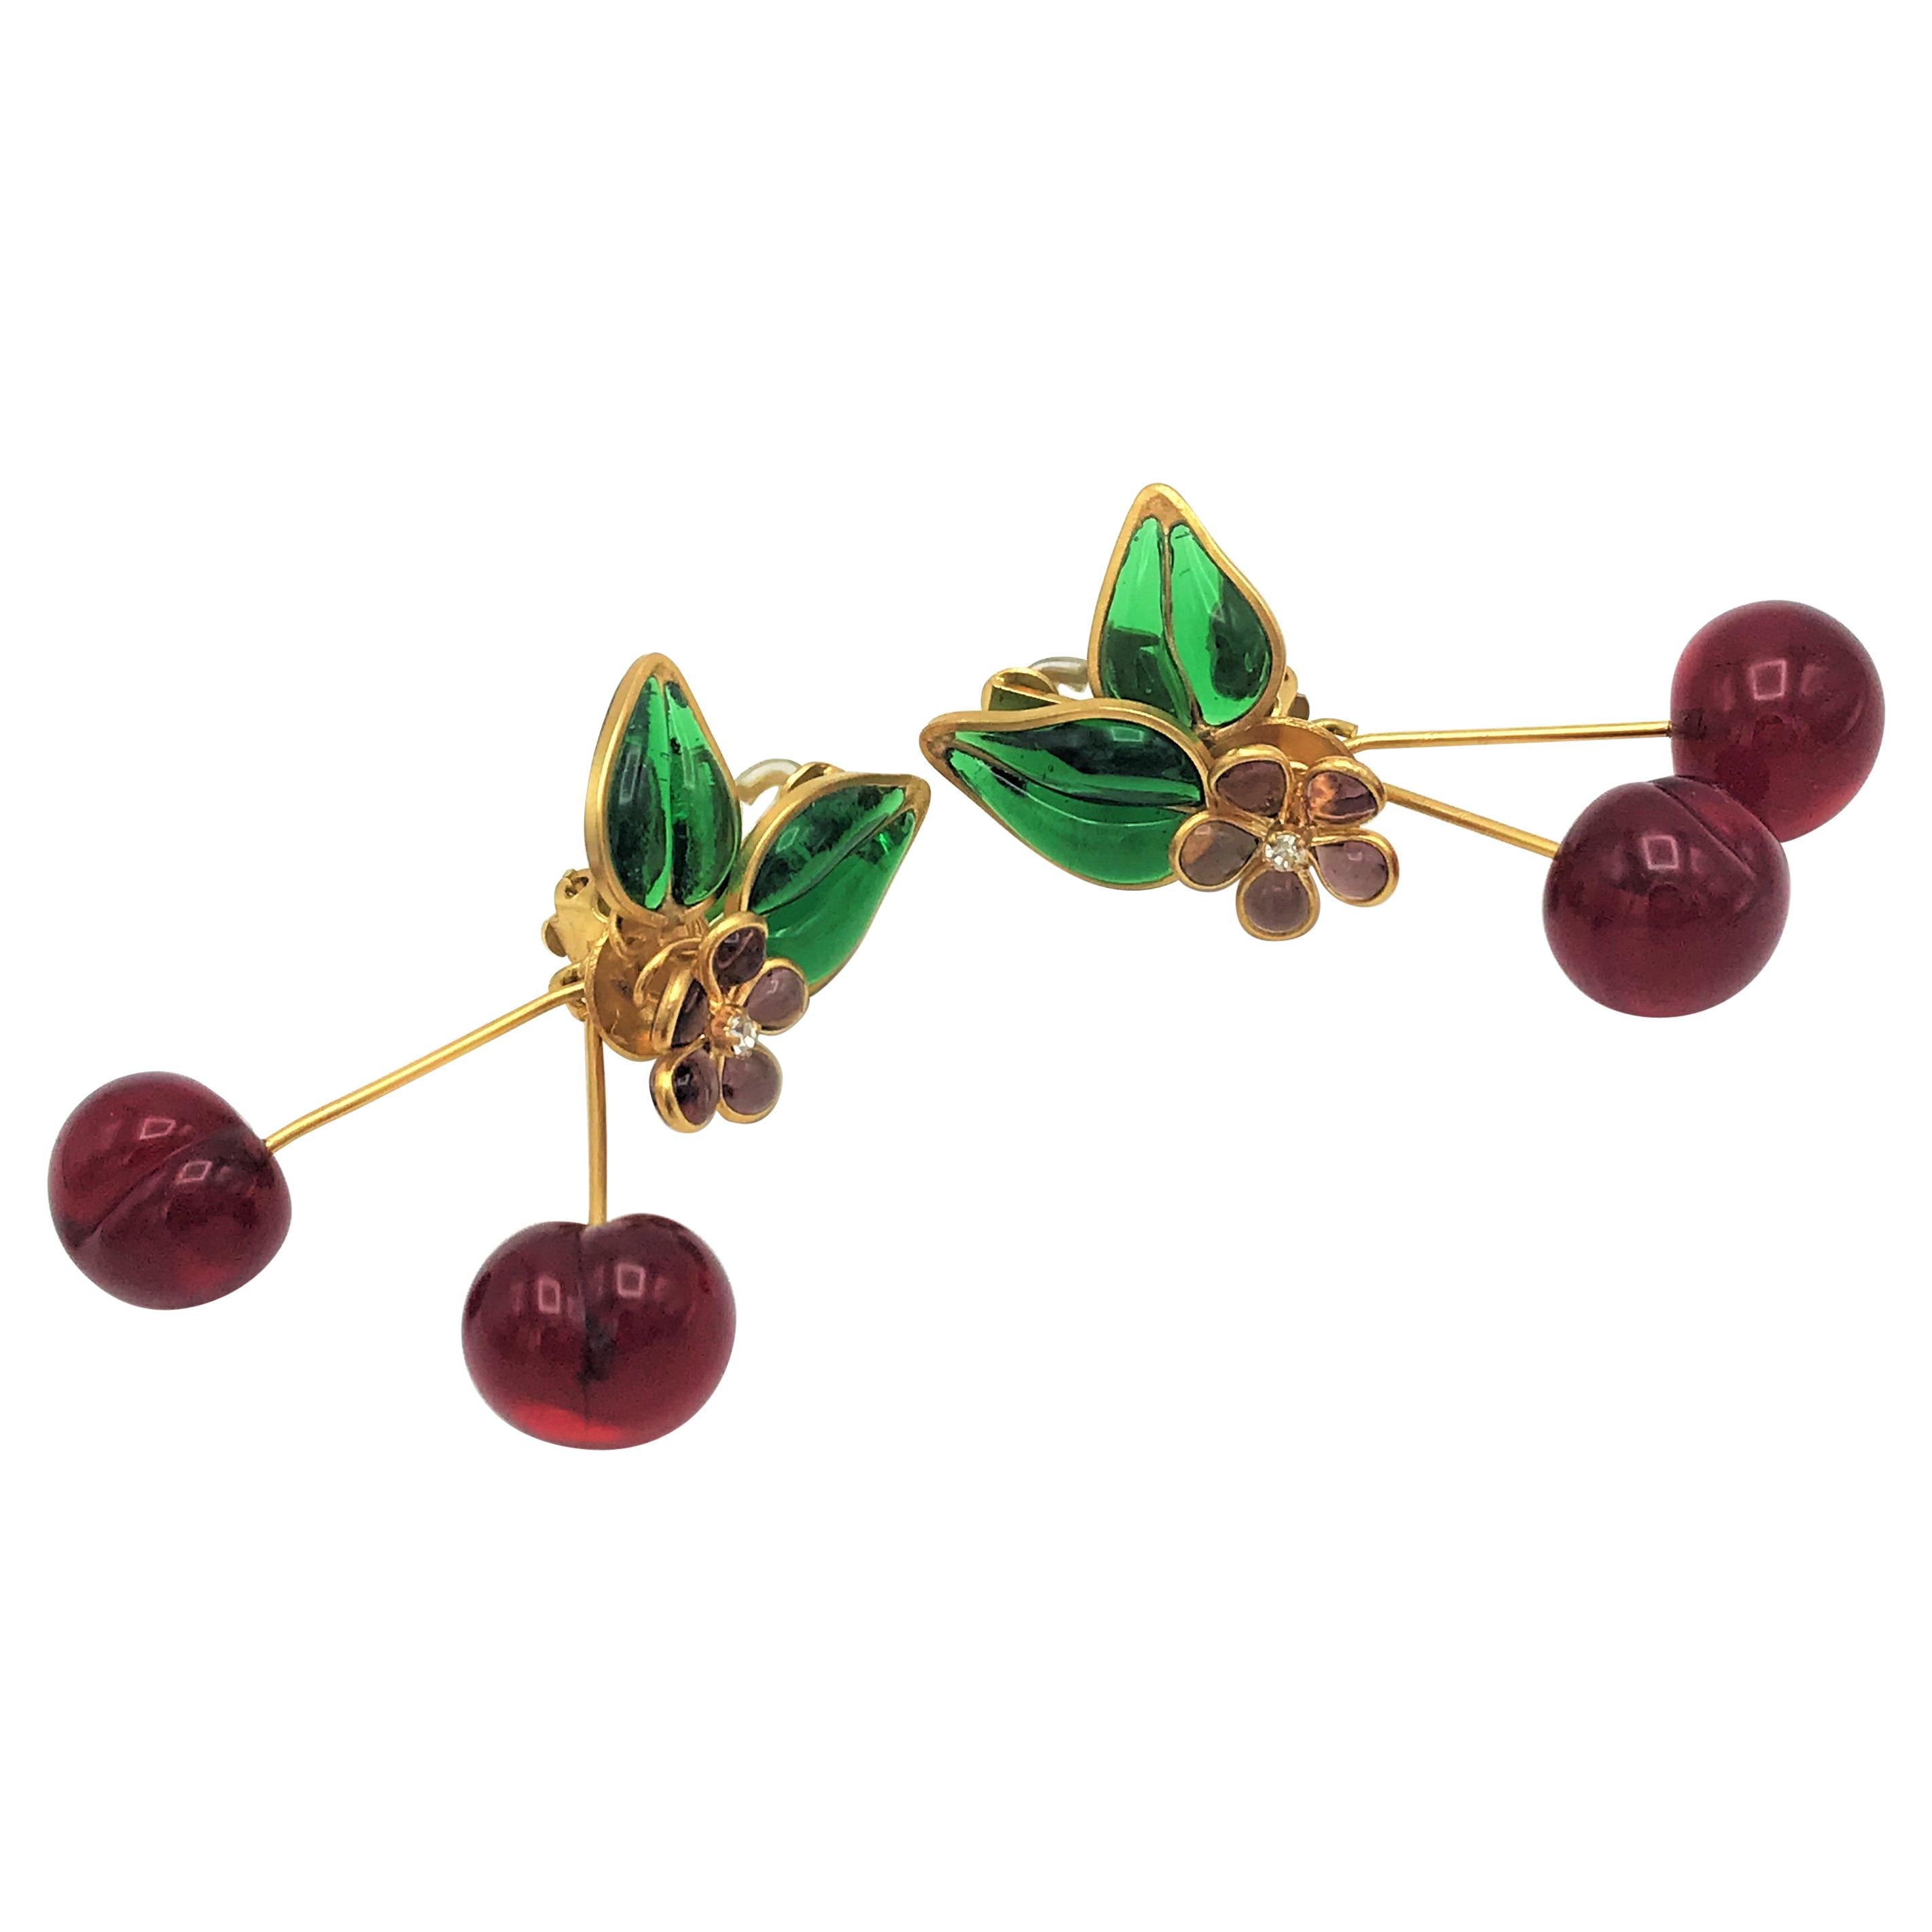 Maison Gripoix for Chanel - Chanel Ear Clip The Shape of Cherry from The House of Gripoix Paris French Artisan